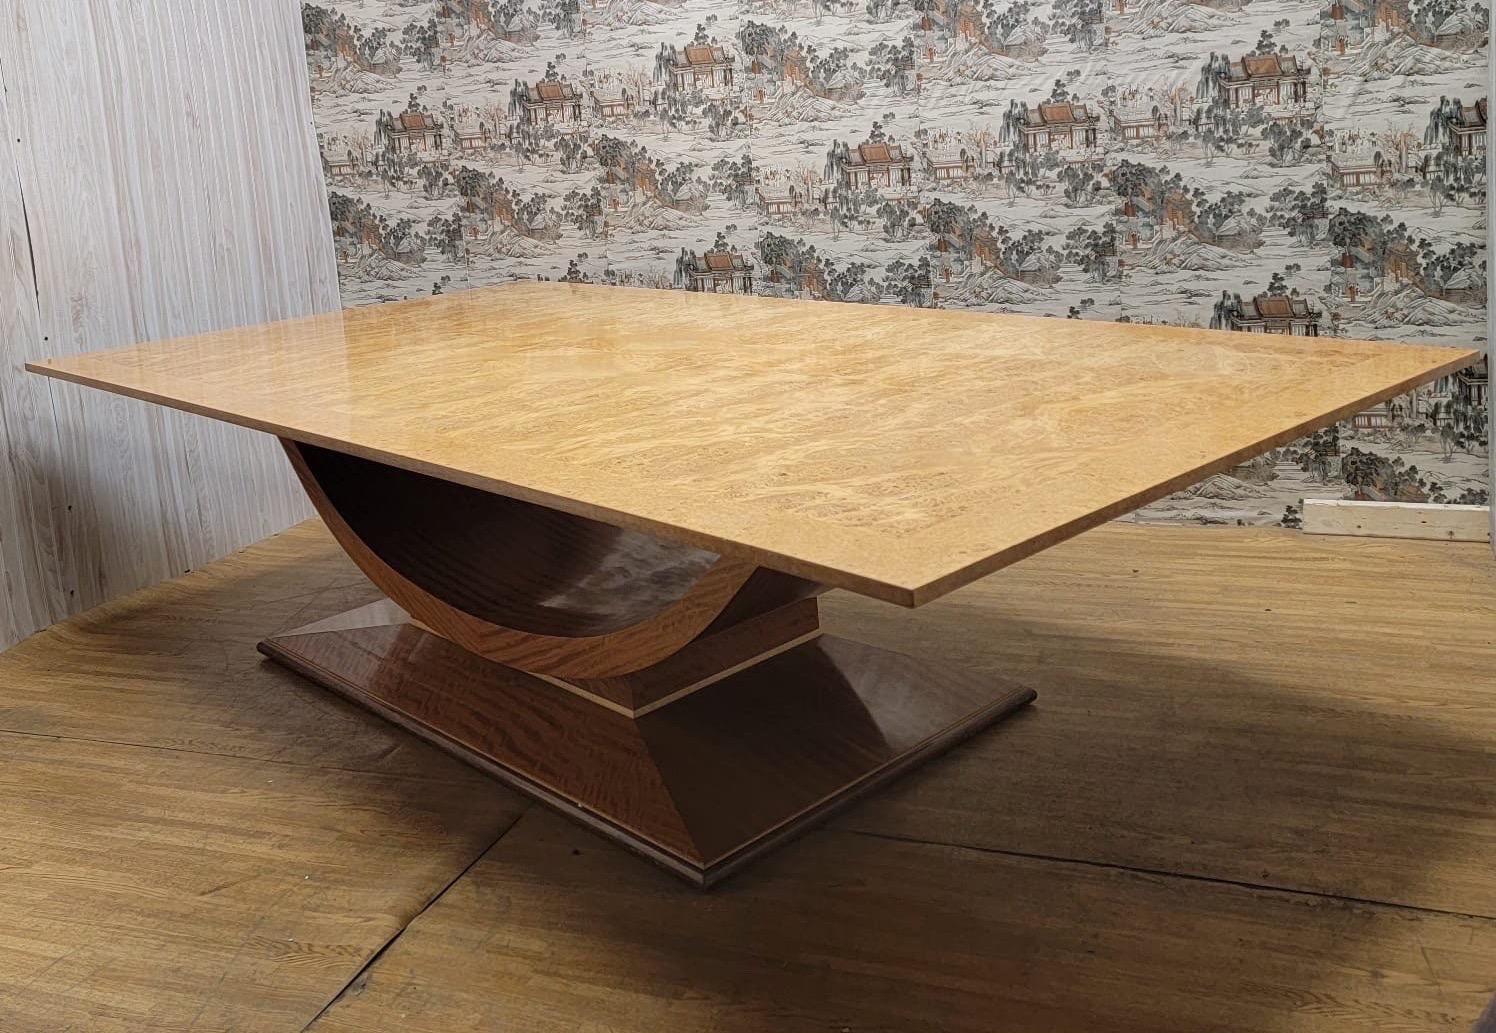 Vintage Art Deco Italian Burled Wood Arched Base Rectangular Dining Table

Absolutely stunning, large 10 chair Italian Biedermeier style dining table featured in Architectural Digest. This table features a burled rectangular deep knife-cut edge top